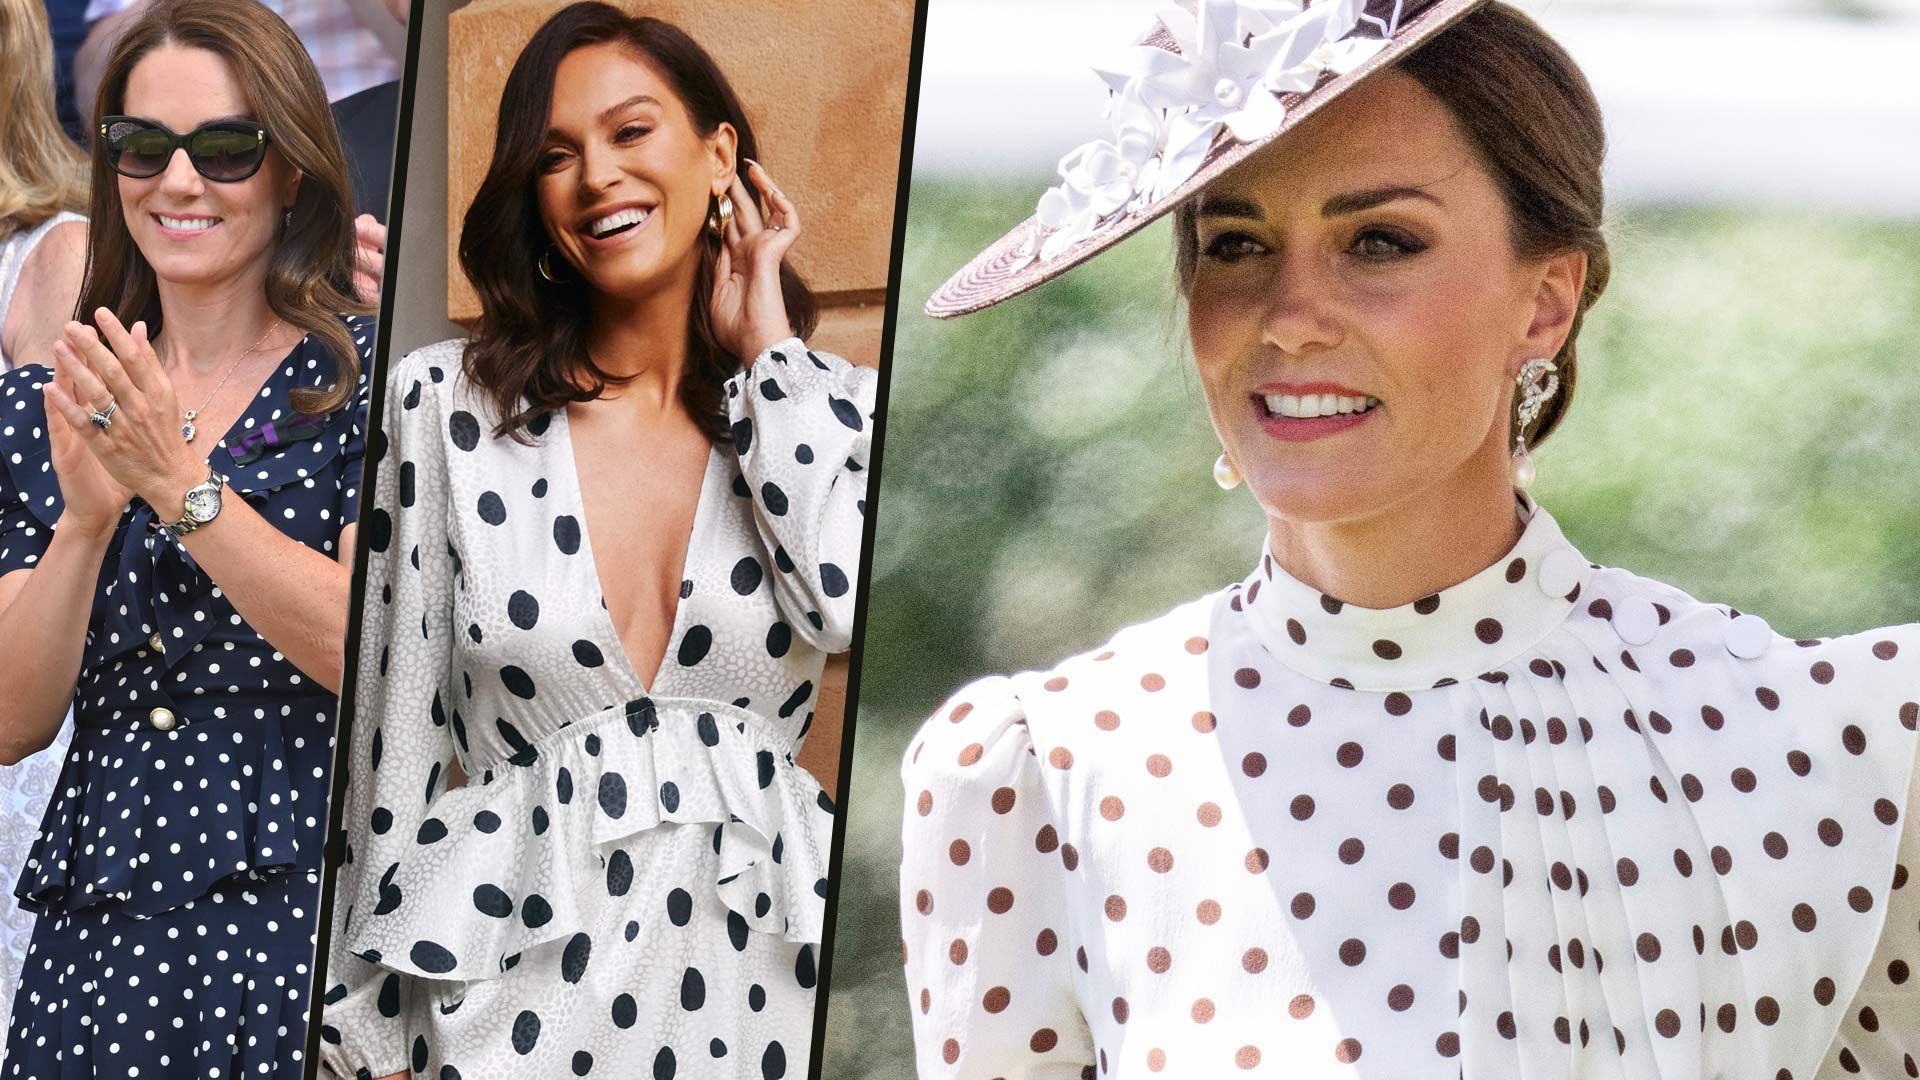 Vicky Pattison's new edit for New Look features a polka dot dress Princess Kate would swoon over